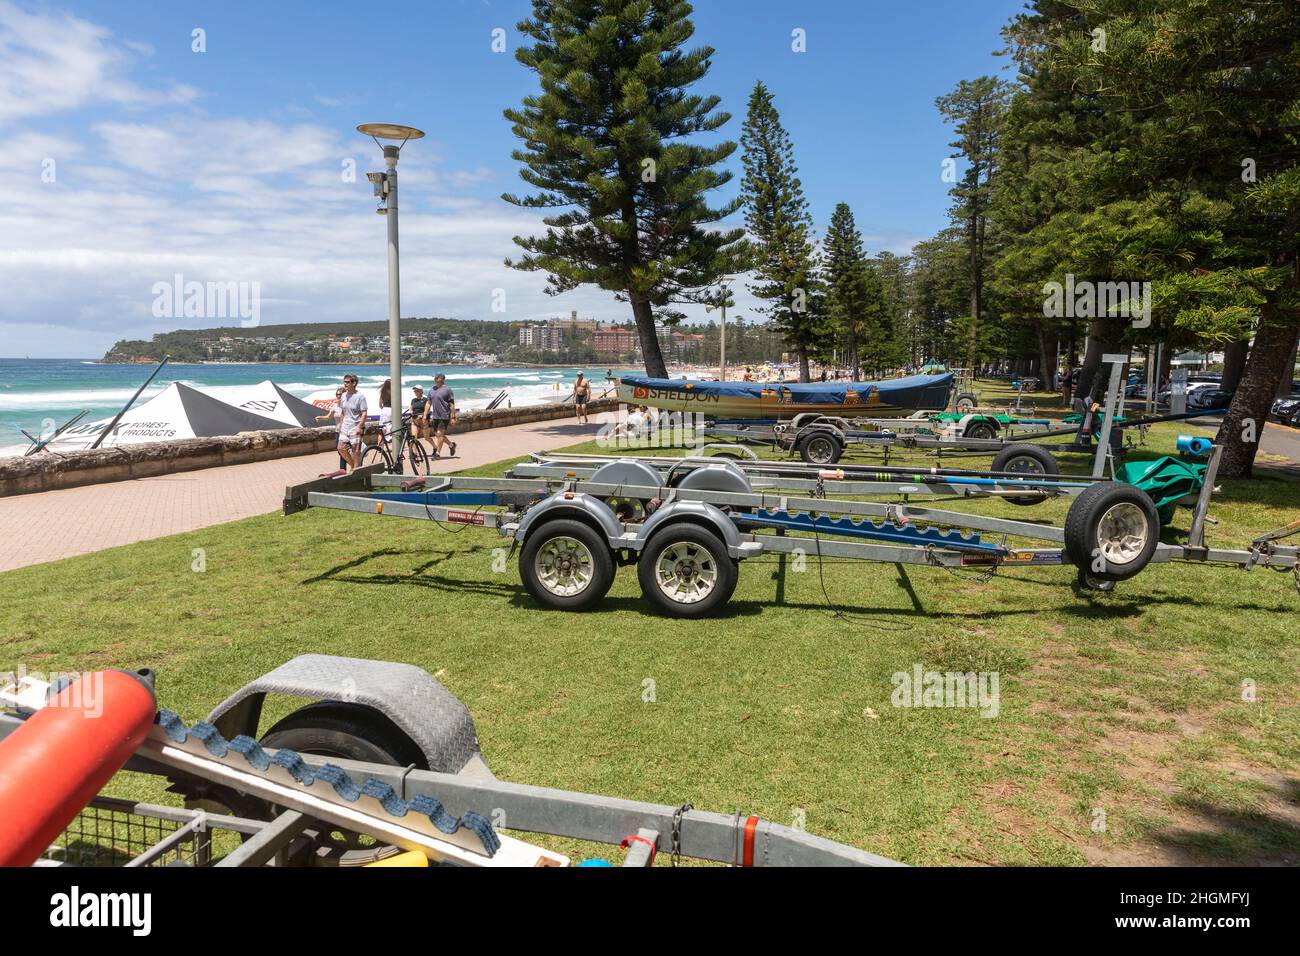 Sydney, Australia. 22nd Jan, 2022. Traditional surf boats race at North Steyne Surf life saving club on Manly Beach and involves clubs and teams from across the Sydney and local areas in New South Wales, Australia.Credit Martin Berry@alamy live news. Credit: martin berry/Alamy Live News Stock Photo